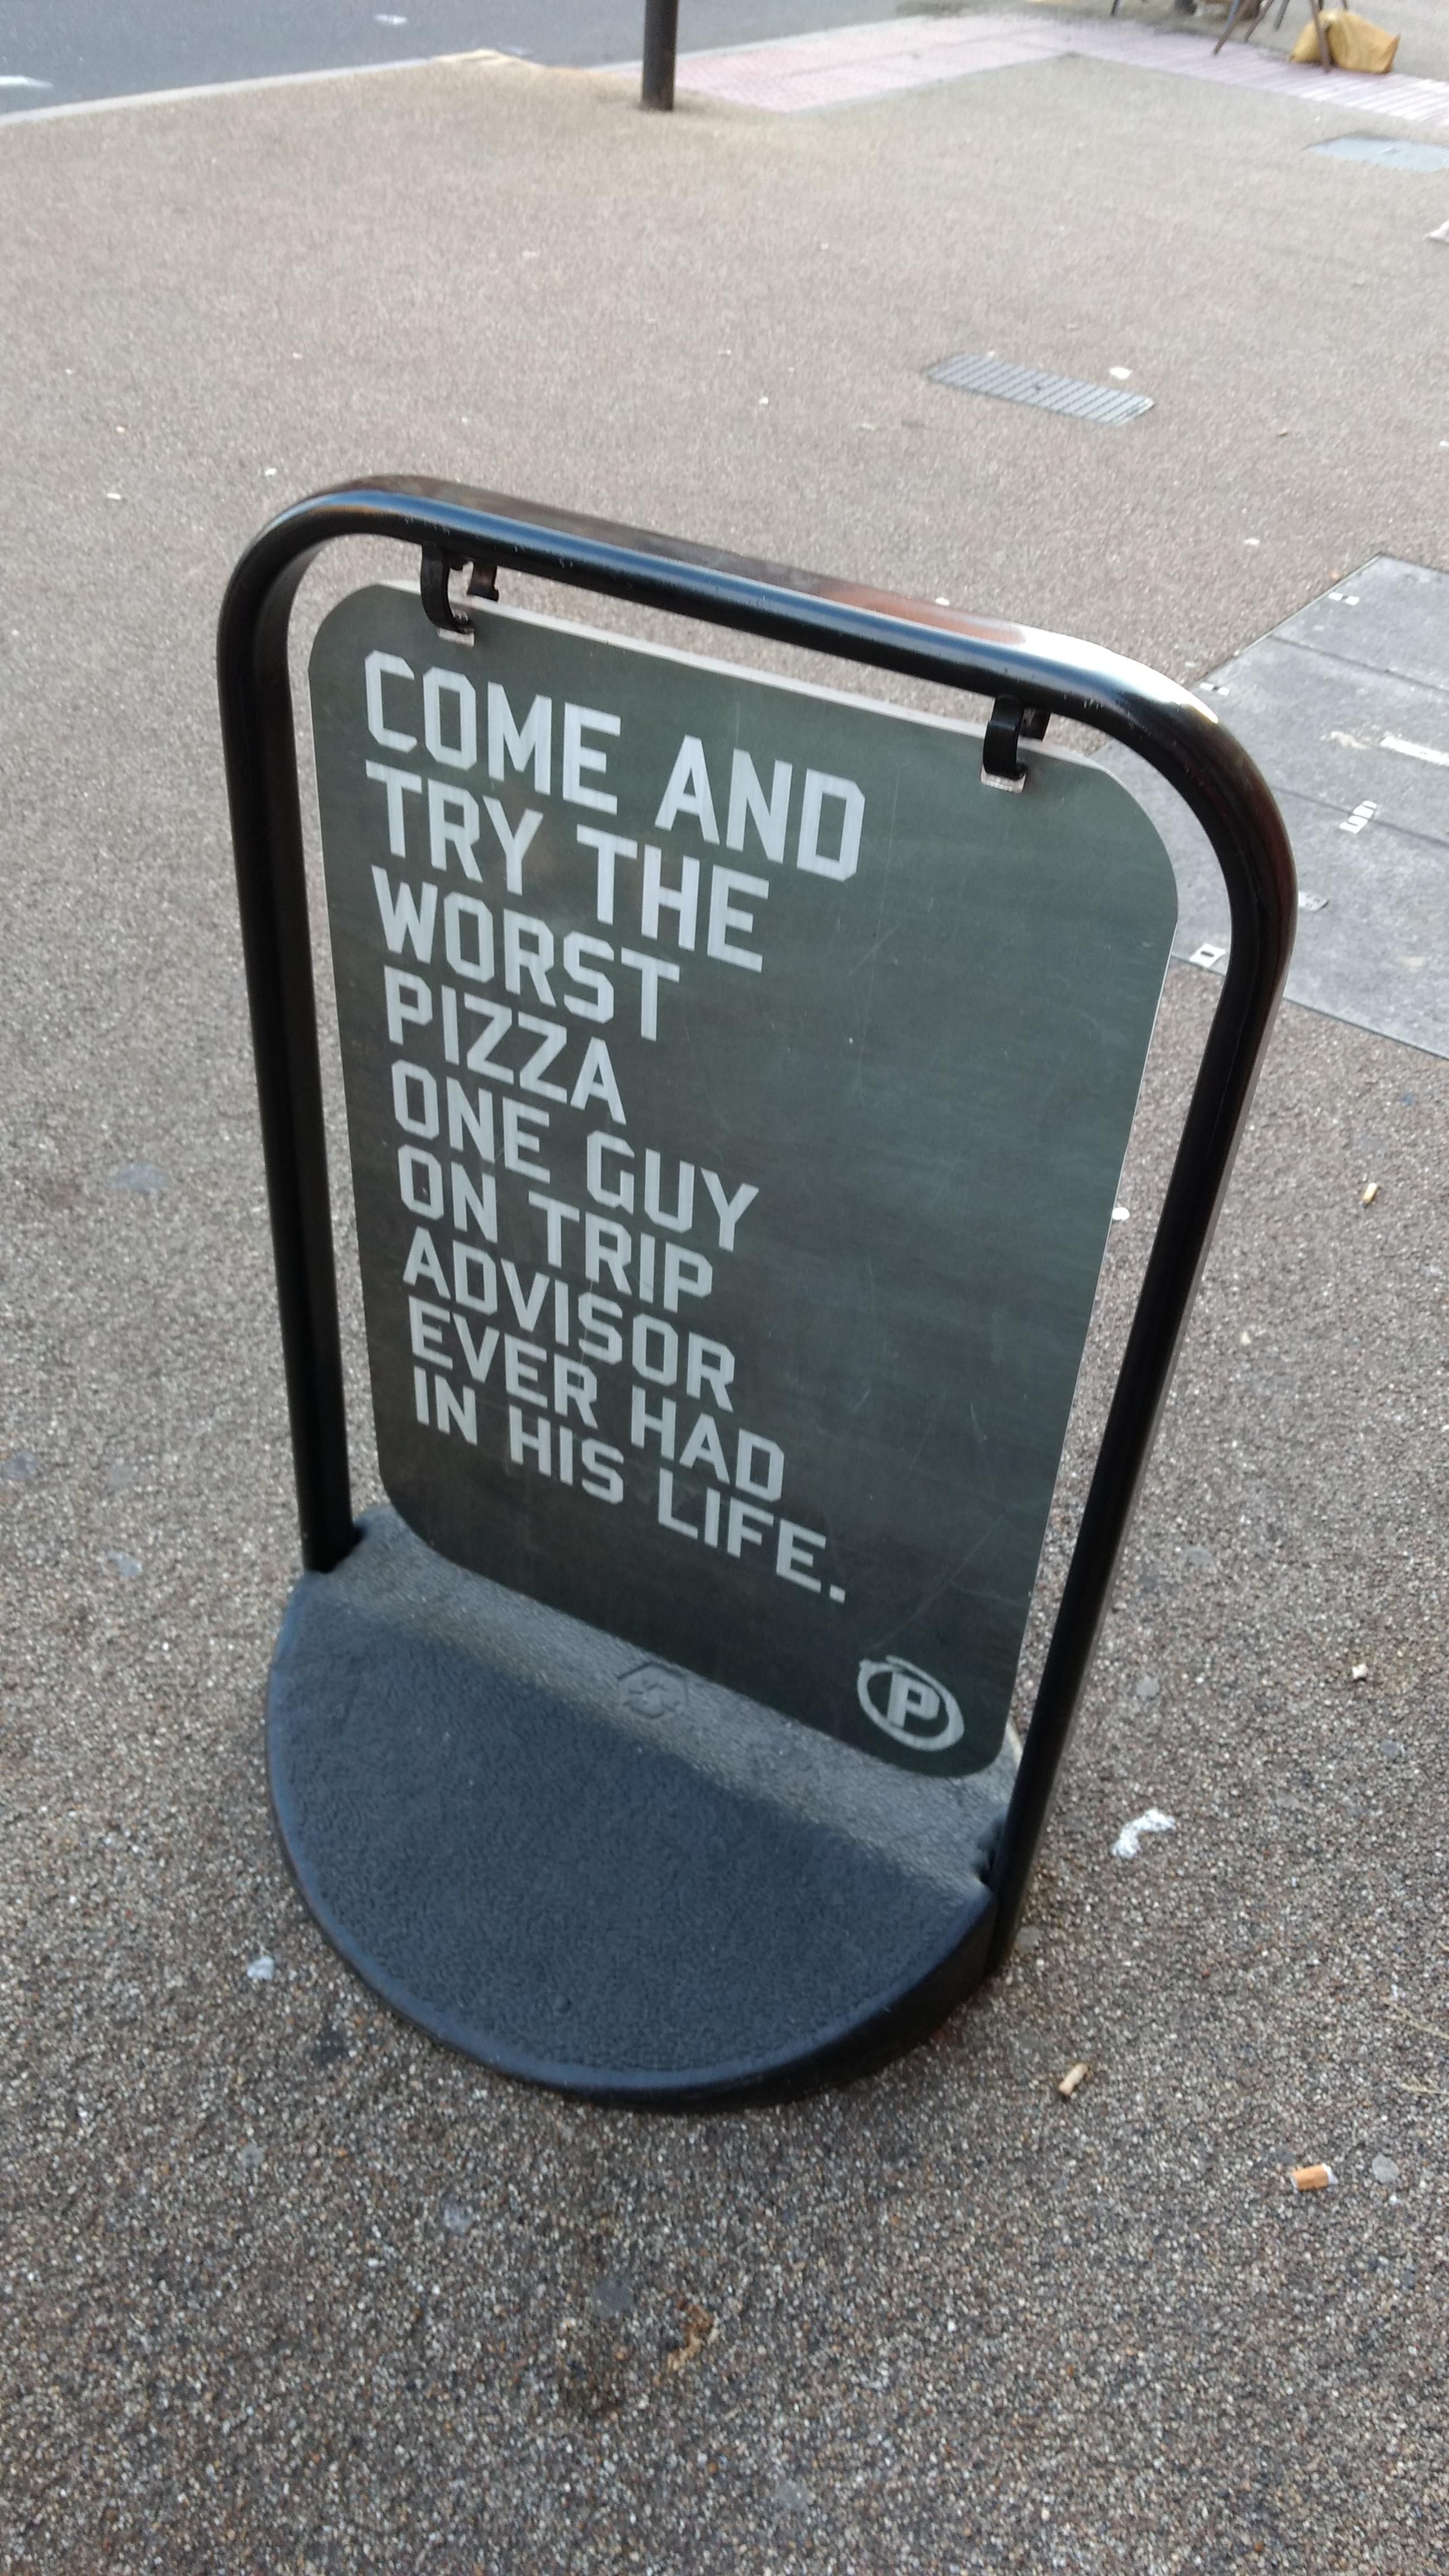 This sign at a pizza restaurant...